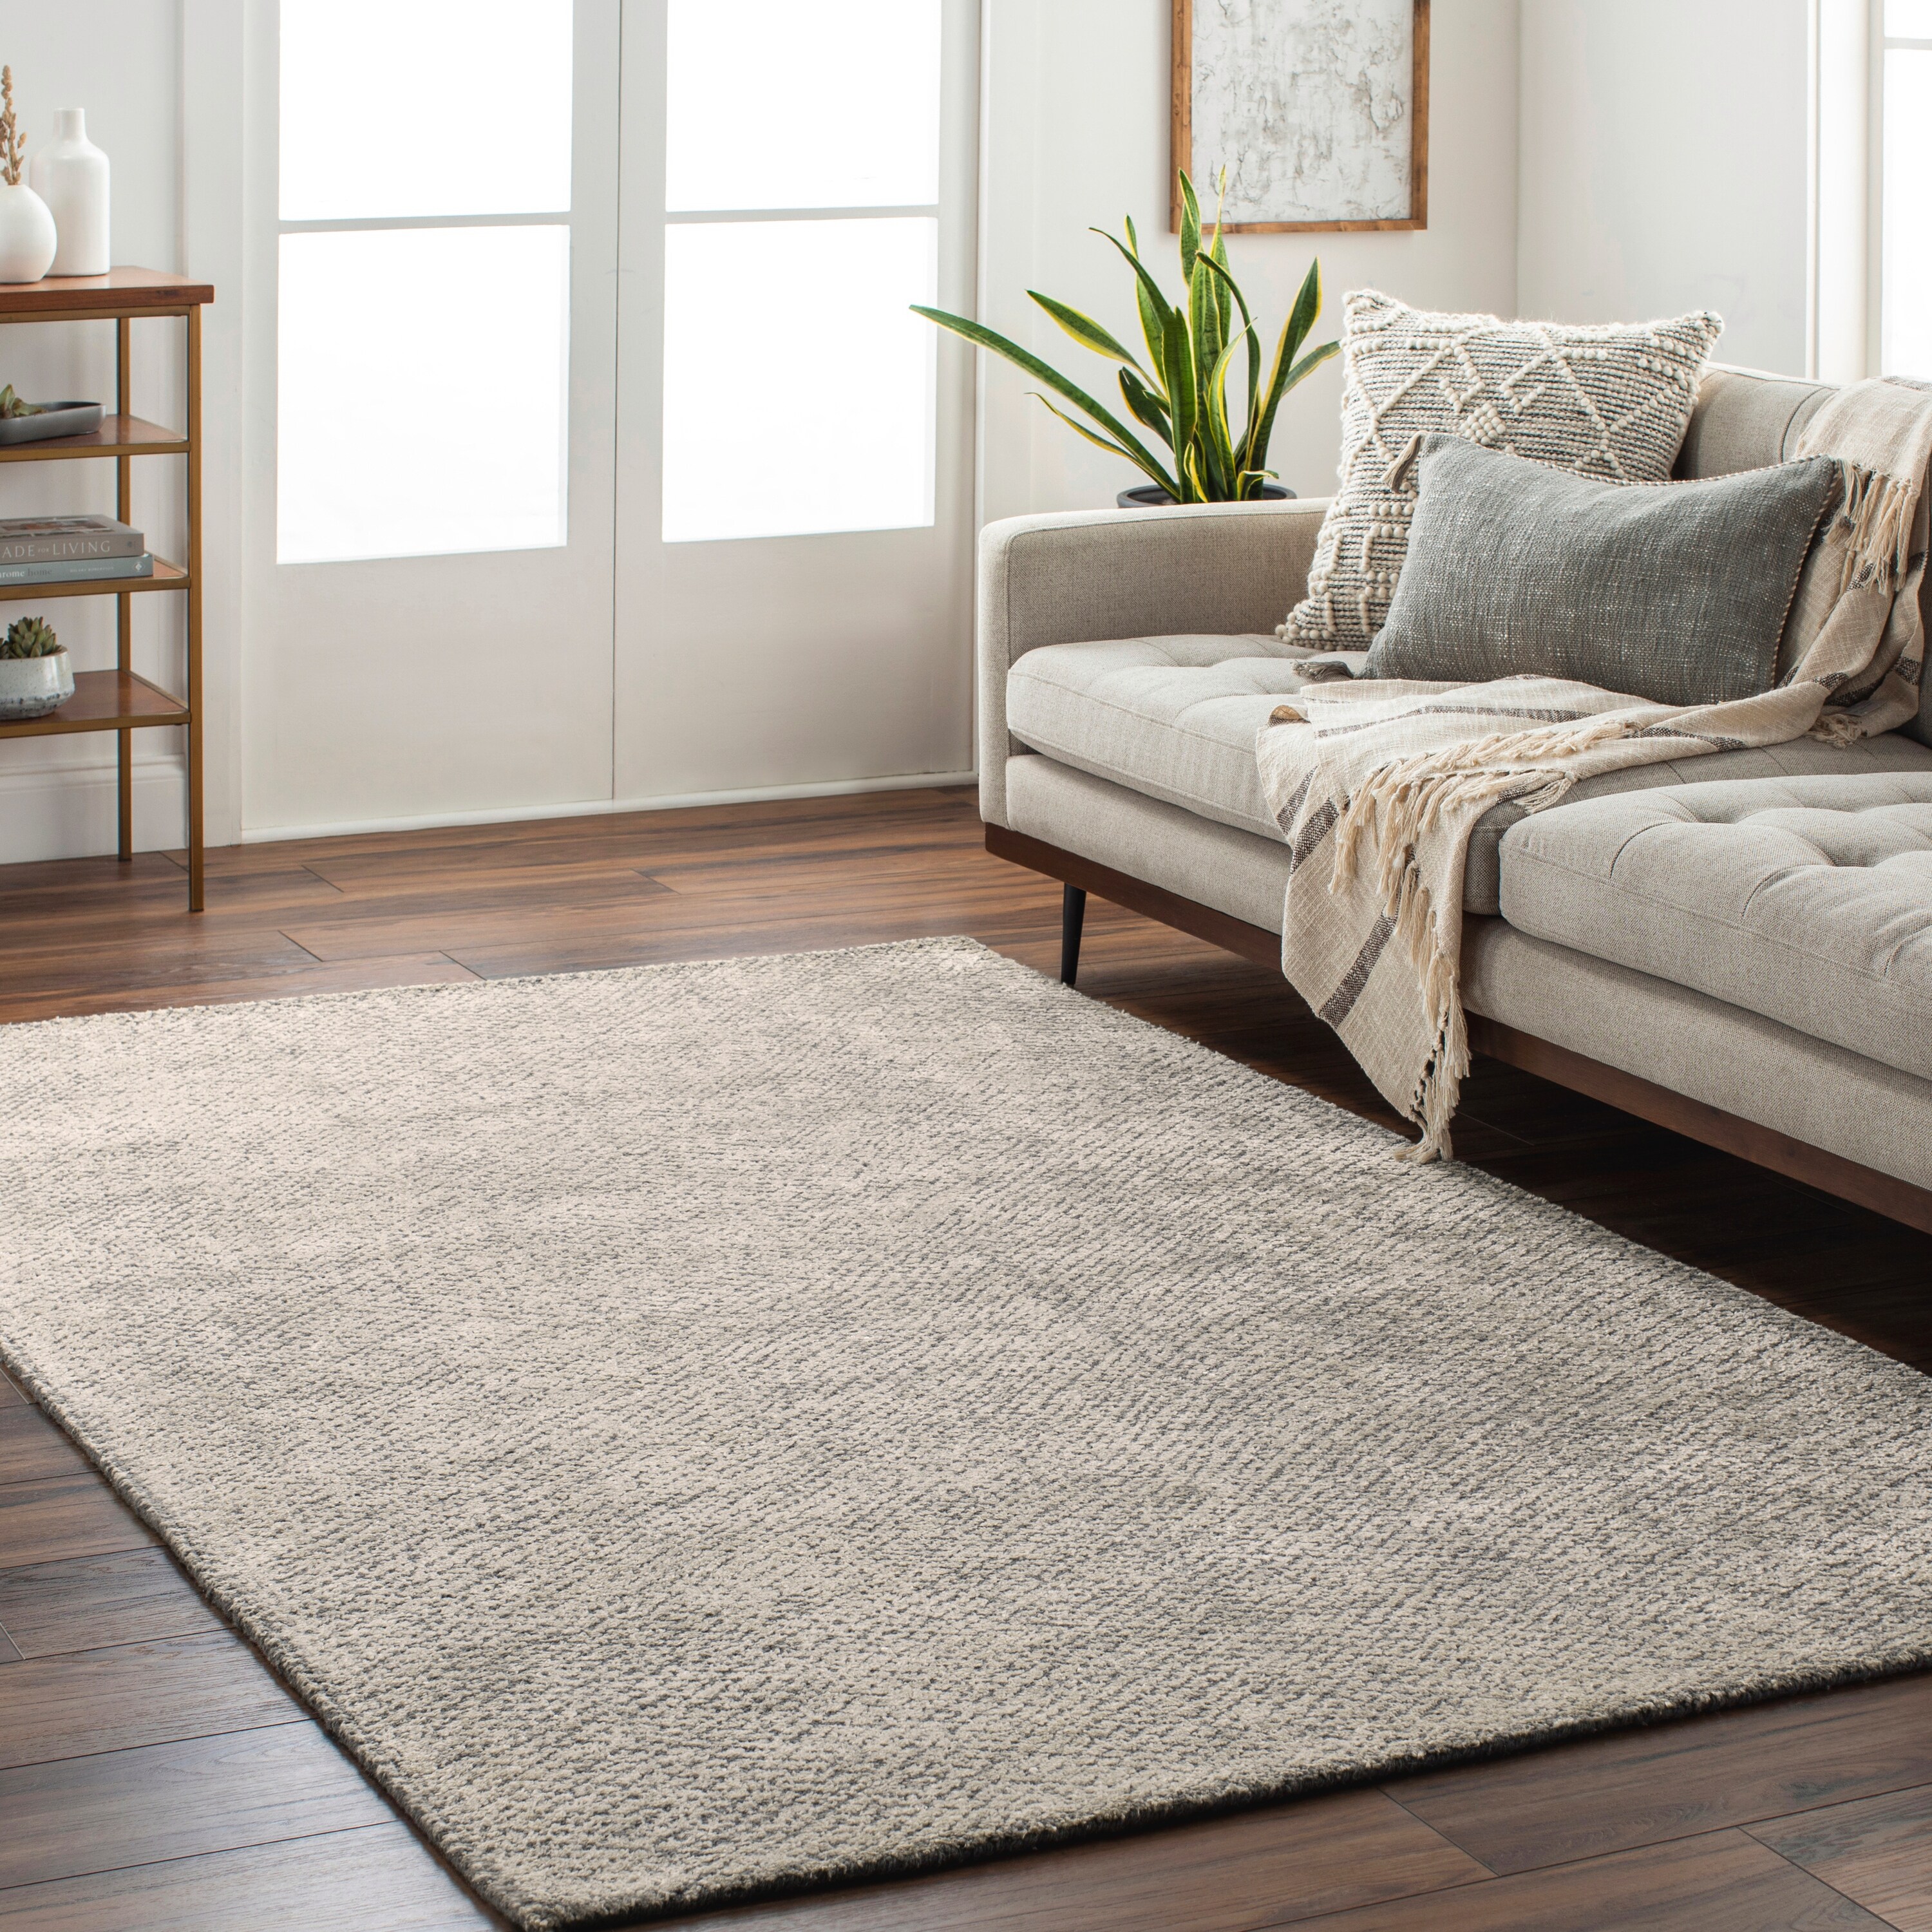 Wool, Traditional Area Rugs - Bed Bath & Beyond